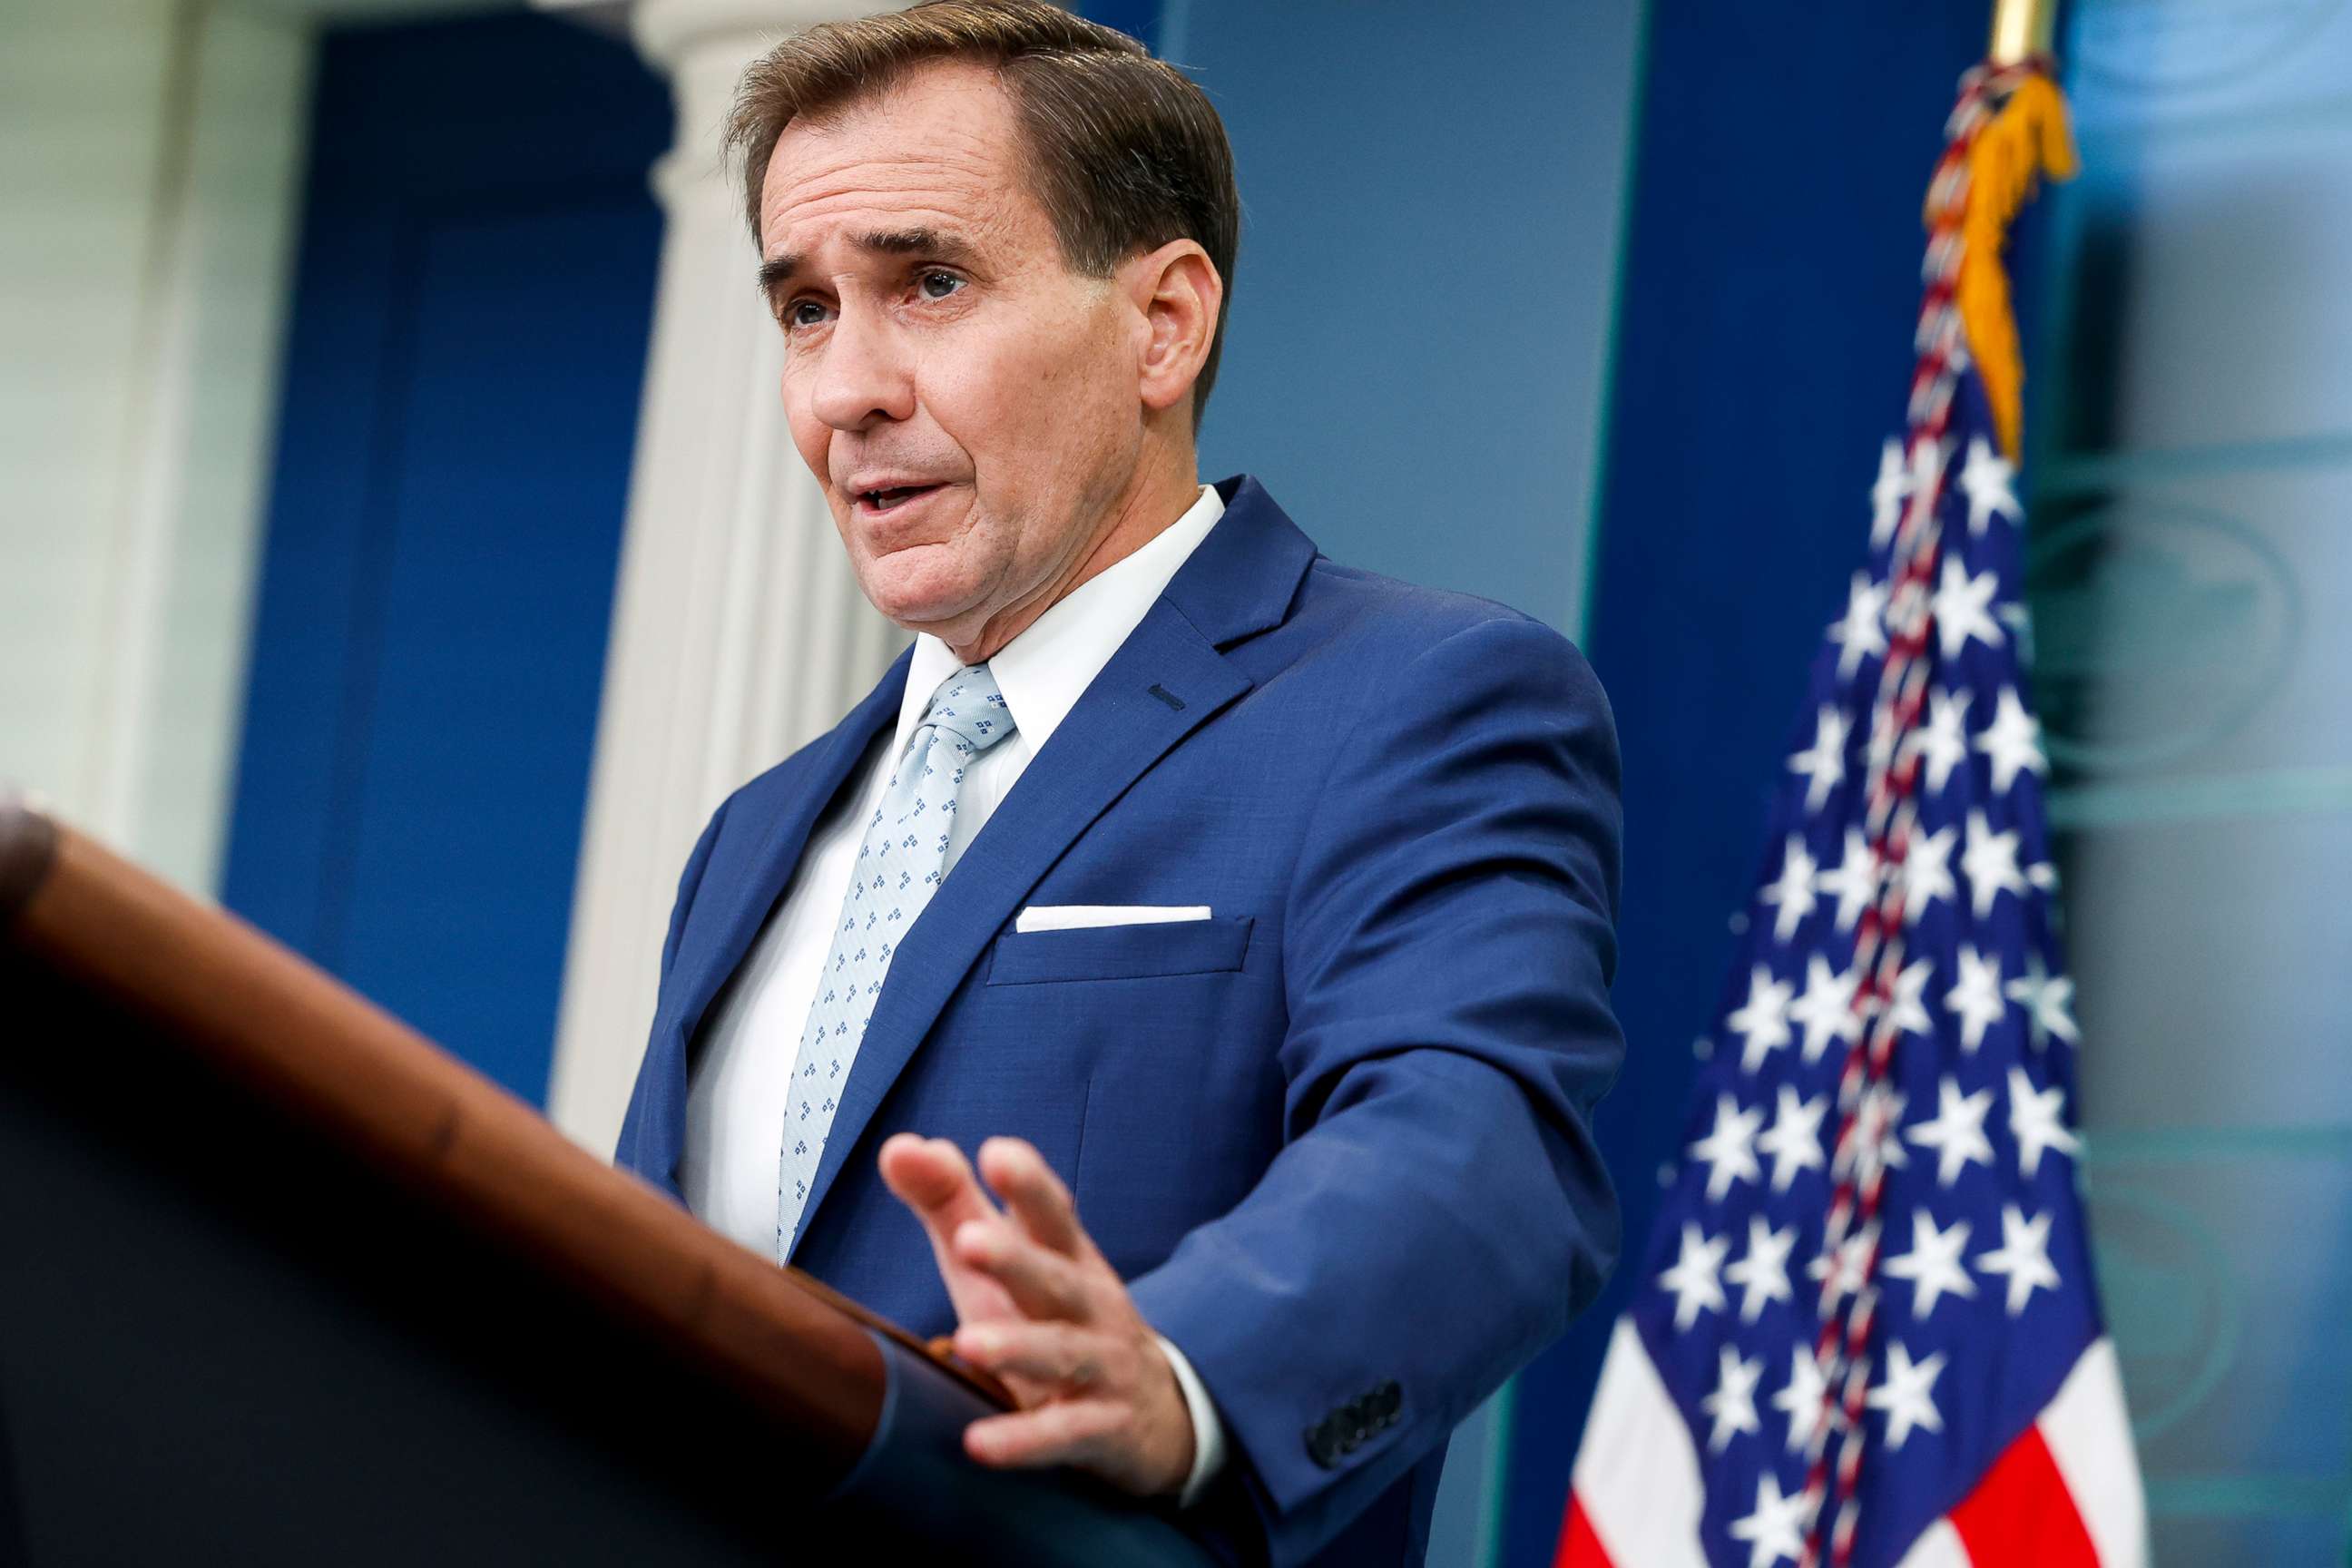 PHOTO: National Security Council coordinator for strategic communications John Kirby speaks during the daily press briefing at the White House, Sept. 13, 2022 in Washington, D.C.